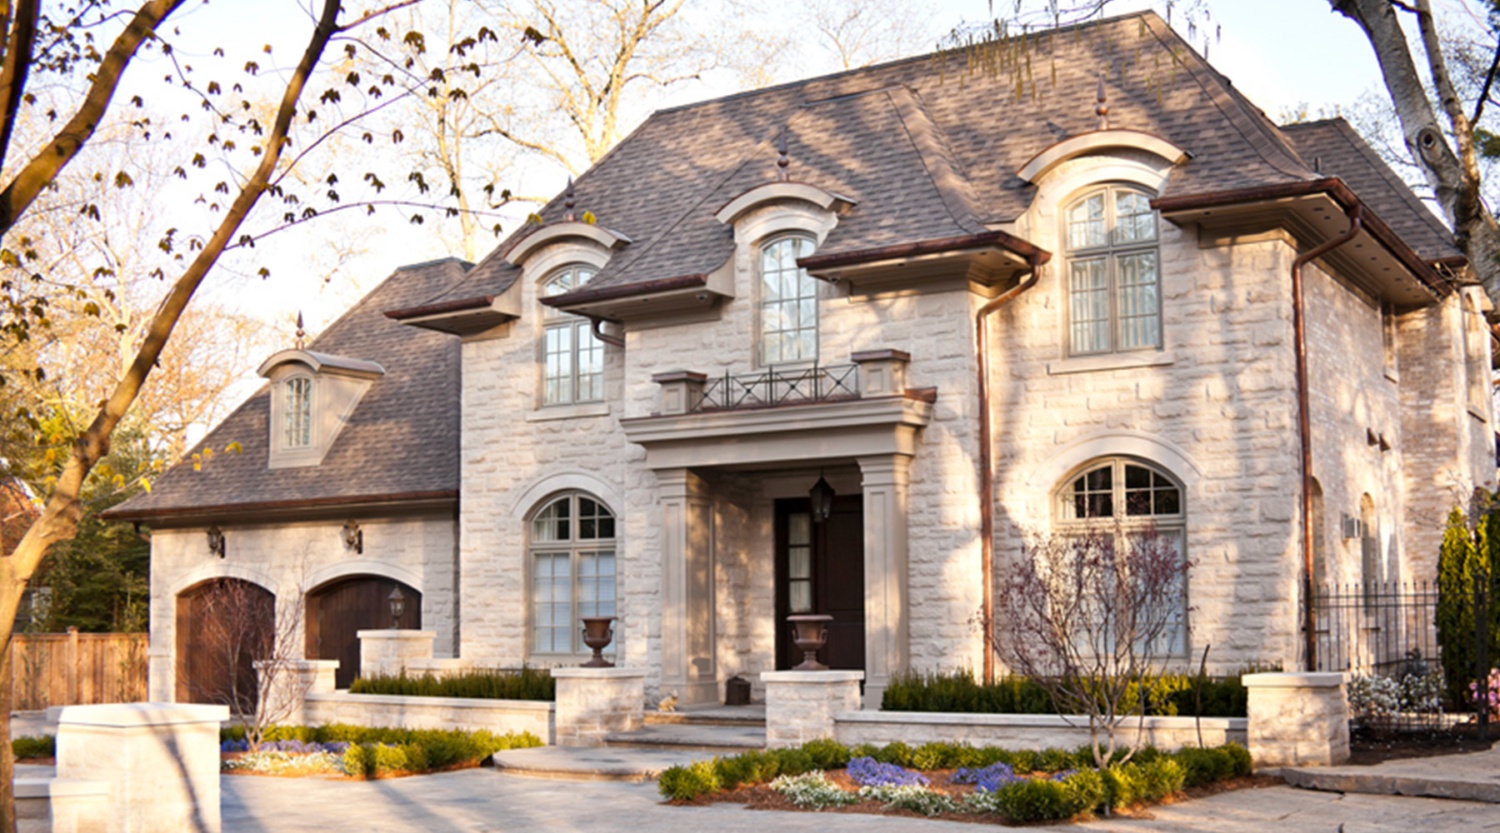 Mississauga home with arched windows, stone walkway and copper detailing.